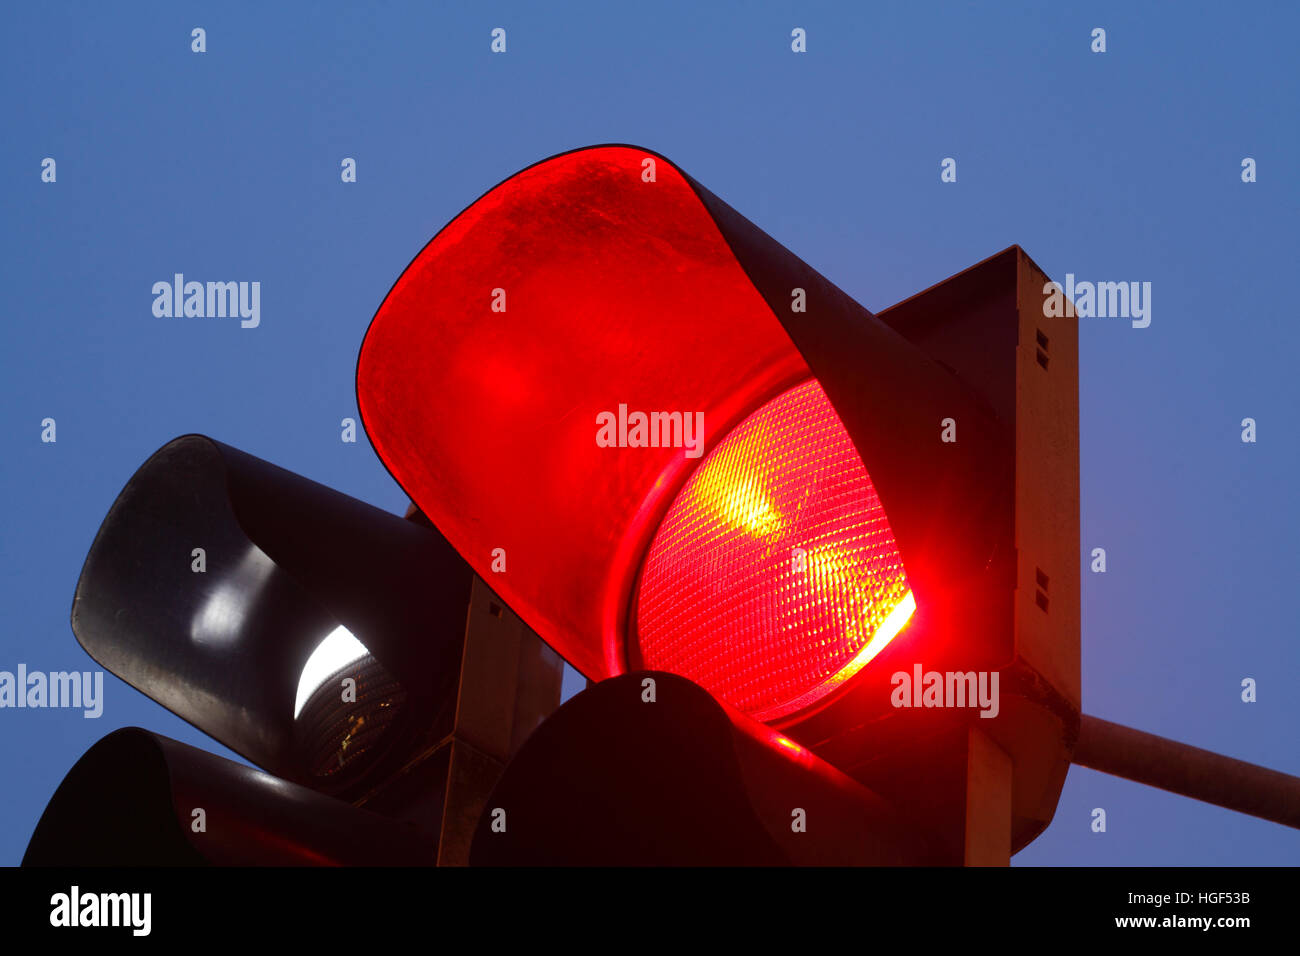 Red traffic lights at dusk, Germany Stock Photo